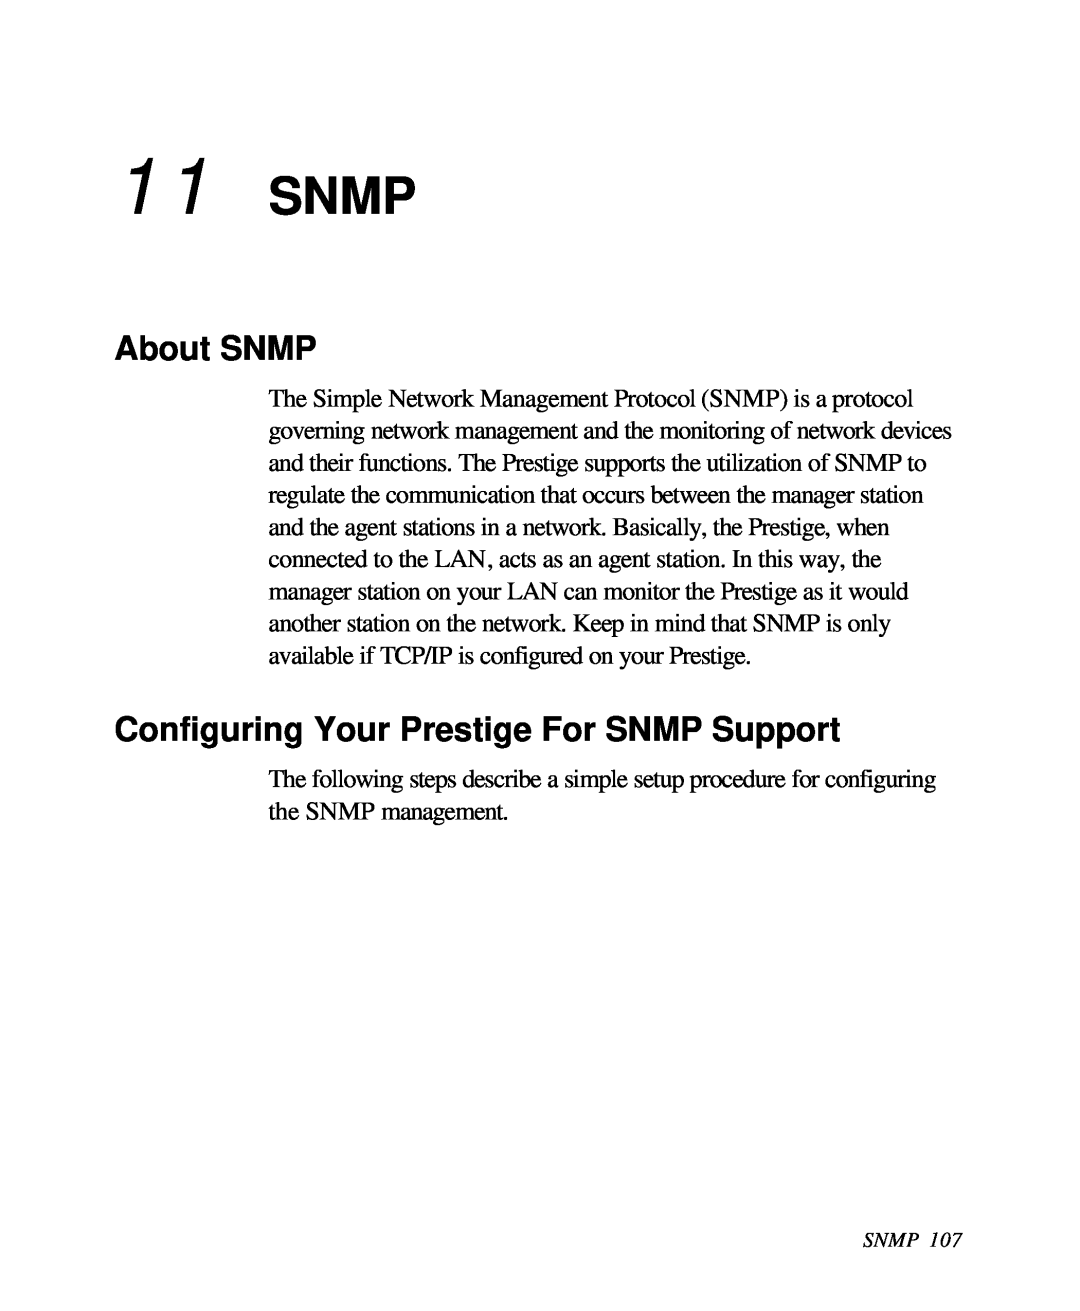 ZyXEL Communications 28641 user manual Snmp, About SNMP, Configuring Your Prestige For SNMP Support 